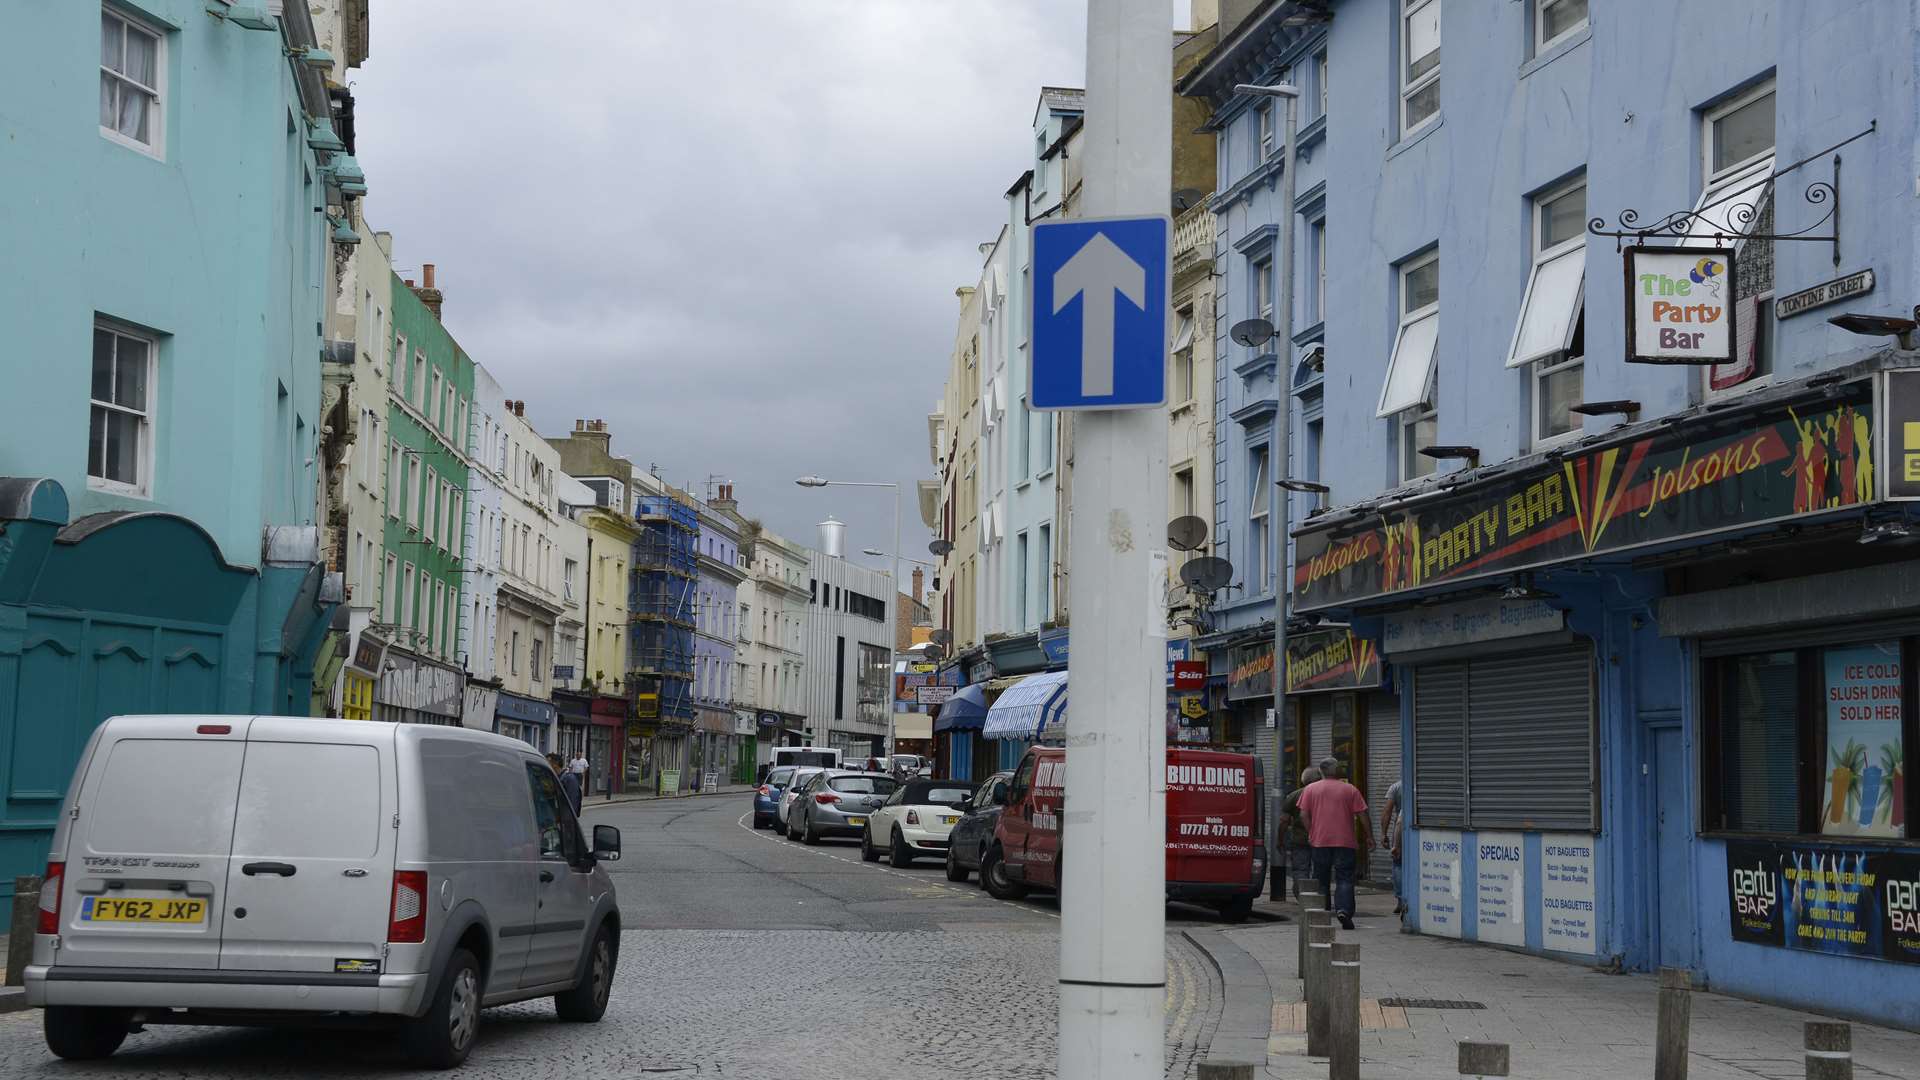 Tontine Street has been given the green light for two-way bus and taxi traffic. Picture: Paul Amos